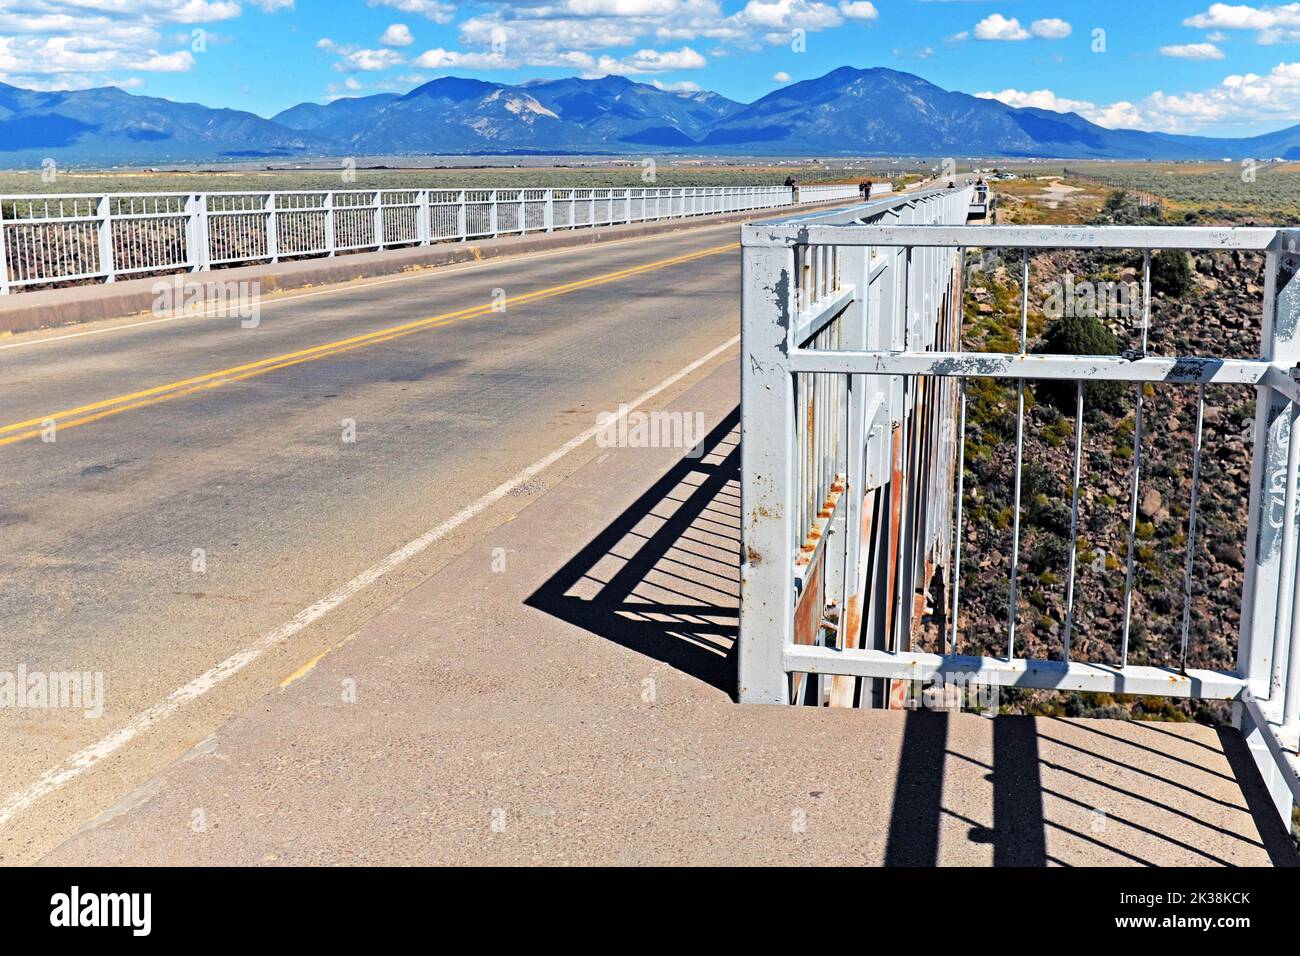 Approximately 600 feet over the Rio Grande, the steel deck arch bridge with pedestrian viewpoints on both sides near Taos, New Mexico. Stock Photo